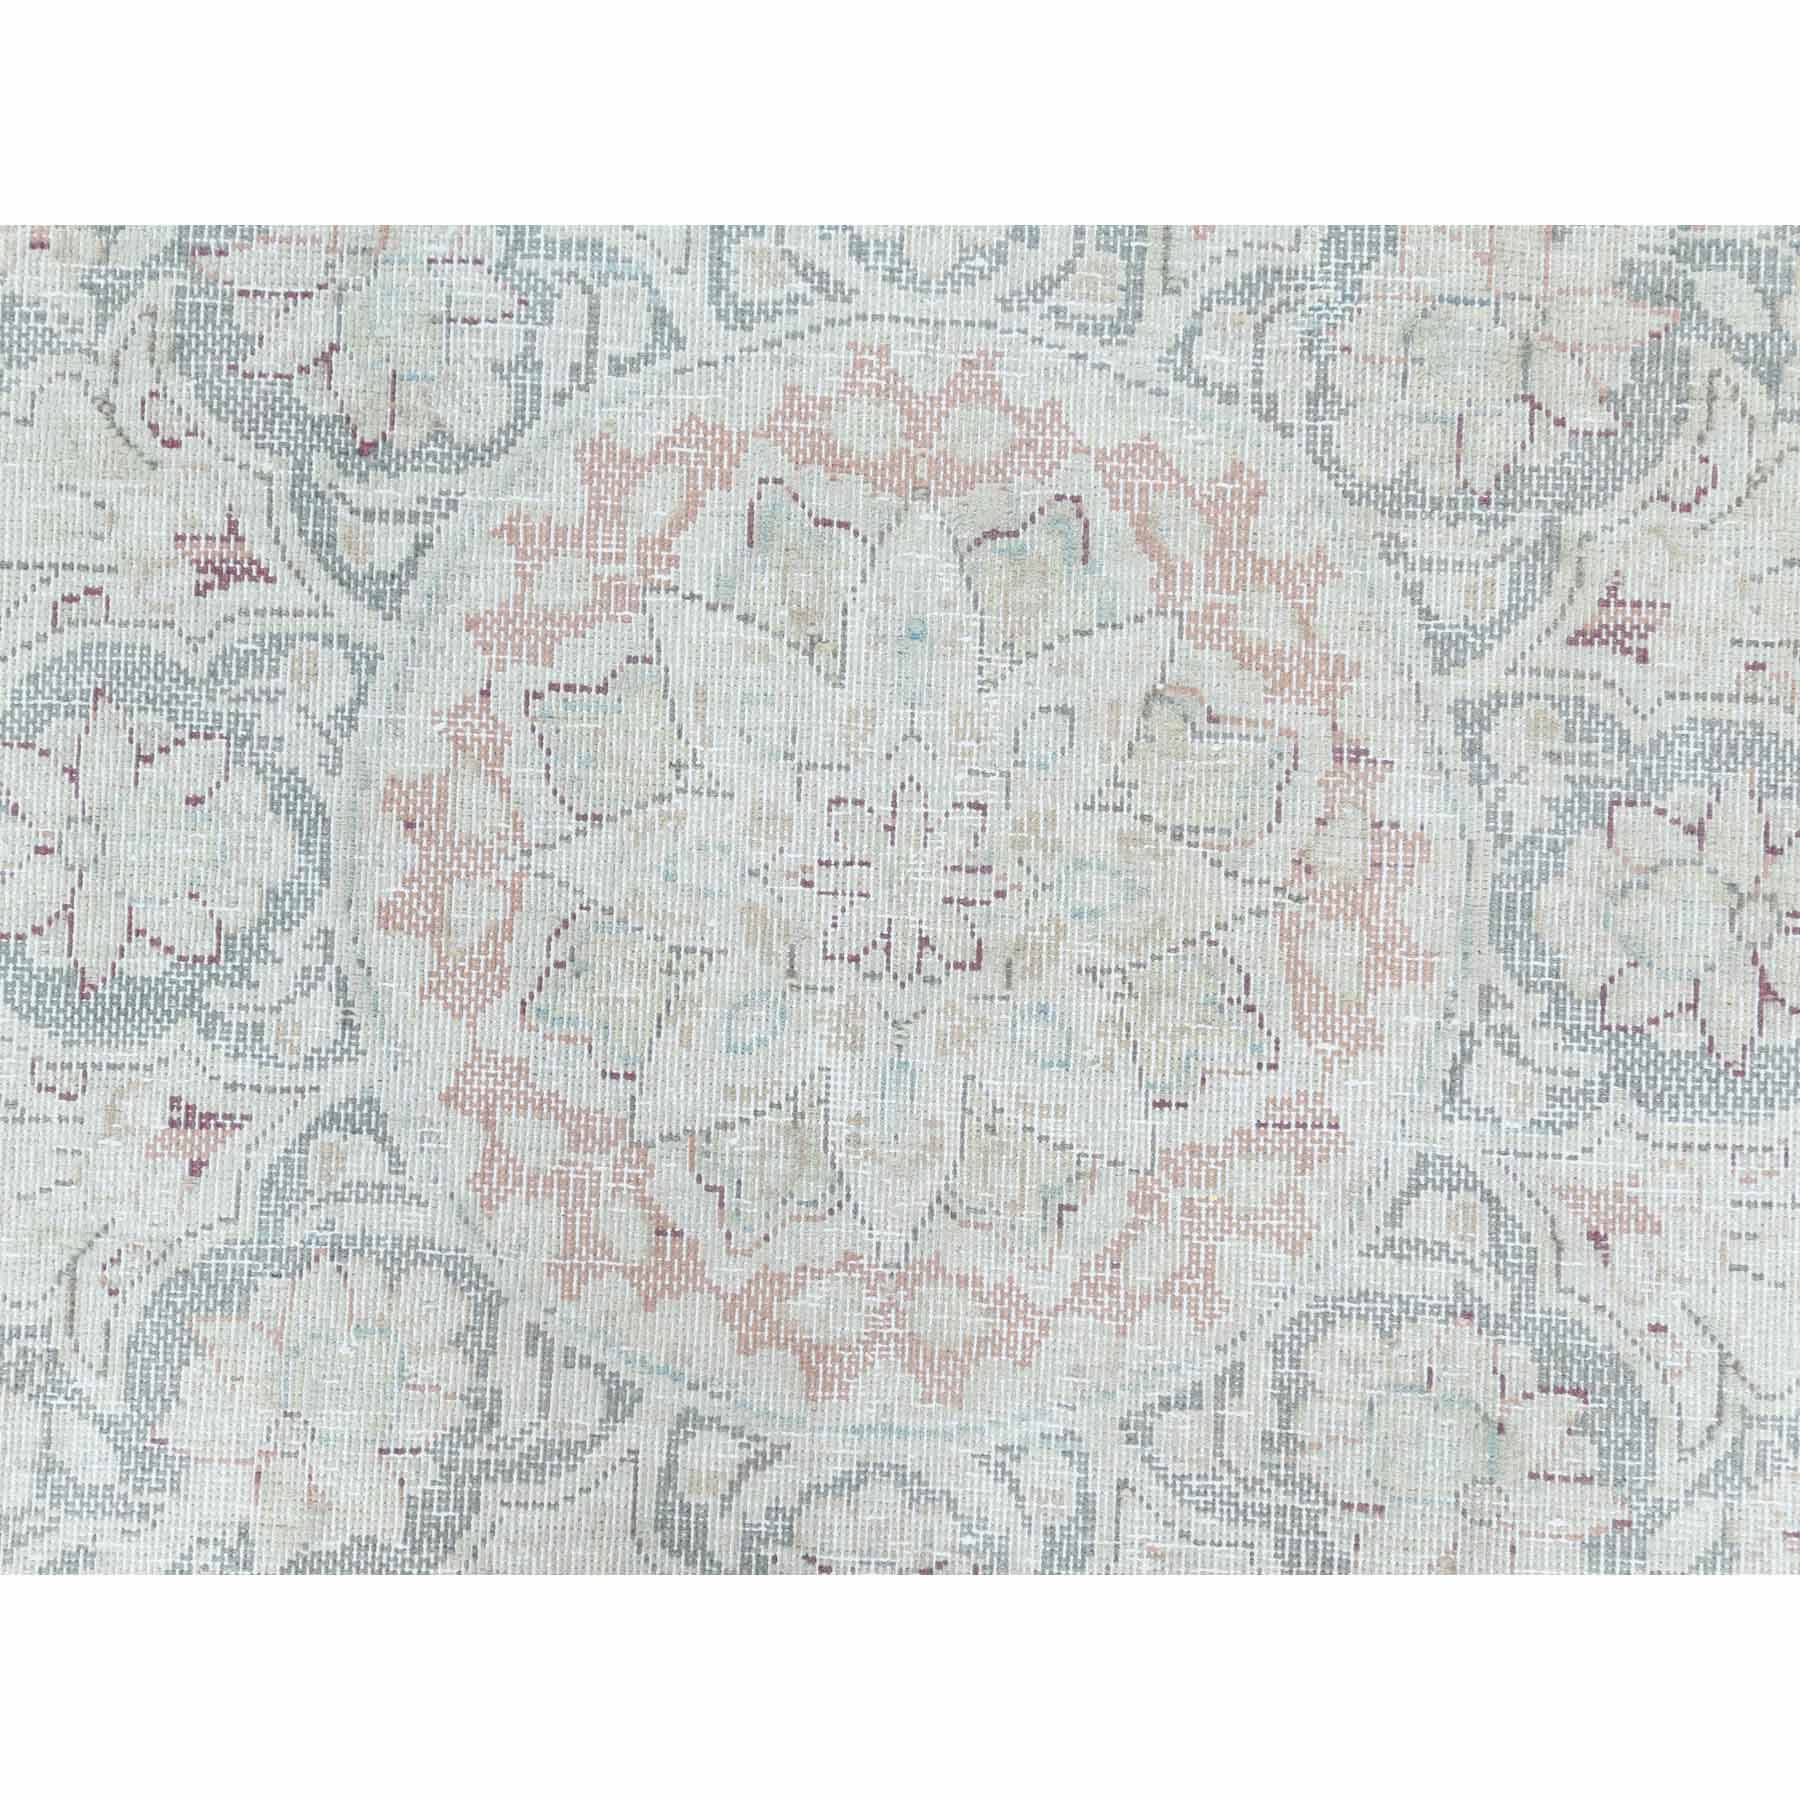 Overdyed-Vintage-Hand-Knotted-Rug-308975